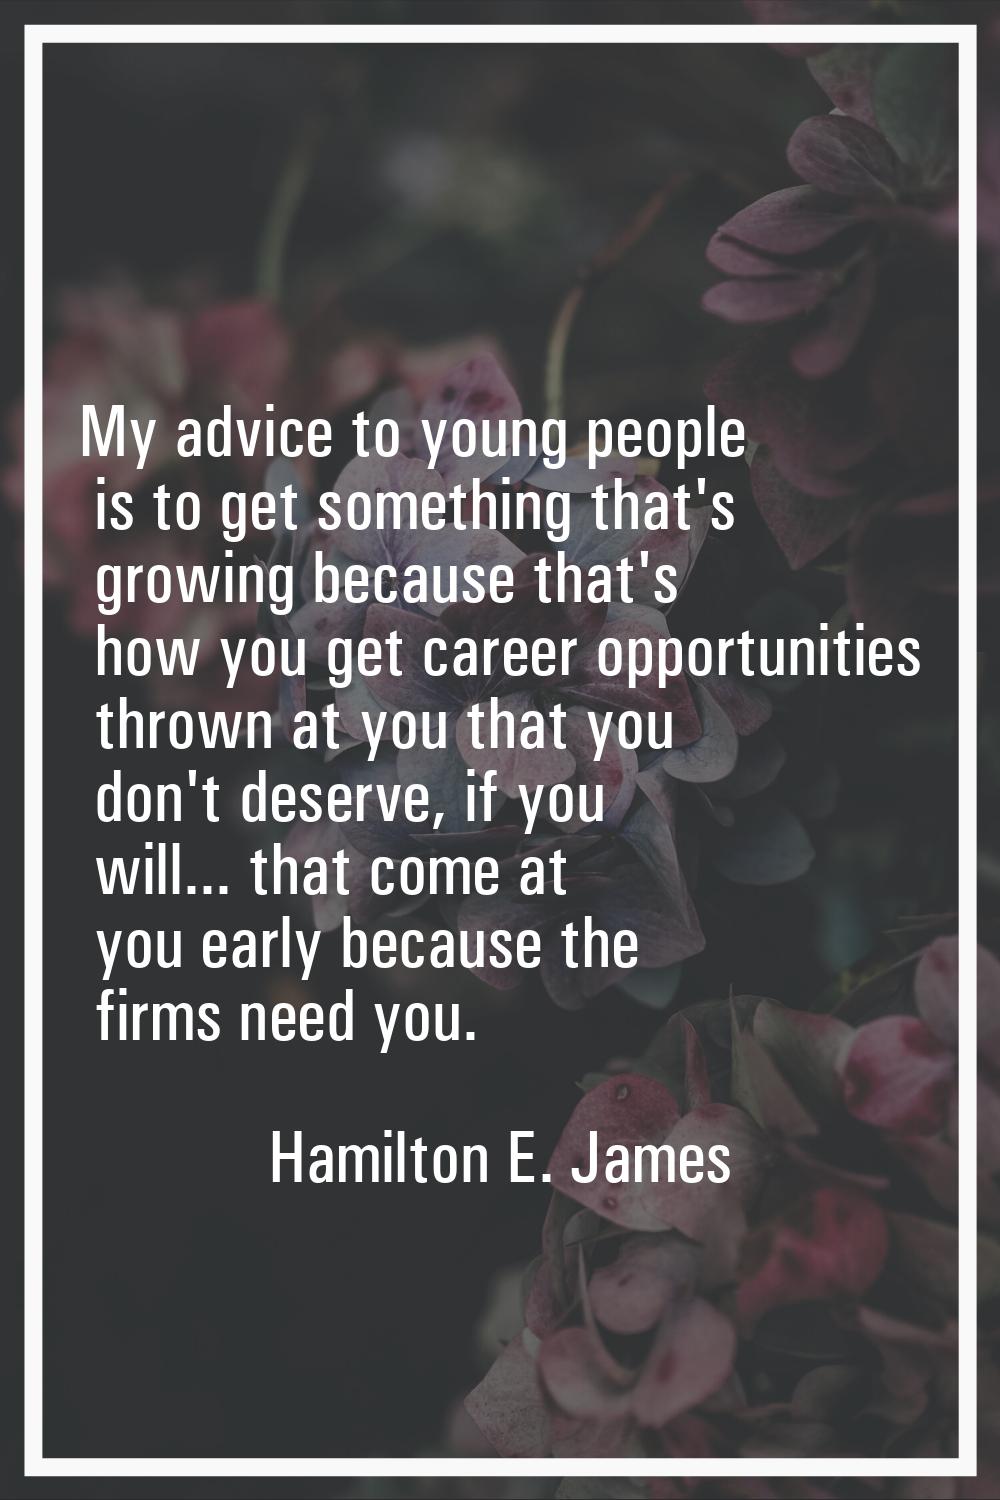 My advice to young people is to get something that's growing because that's how you get career oppo